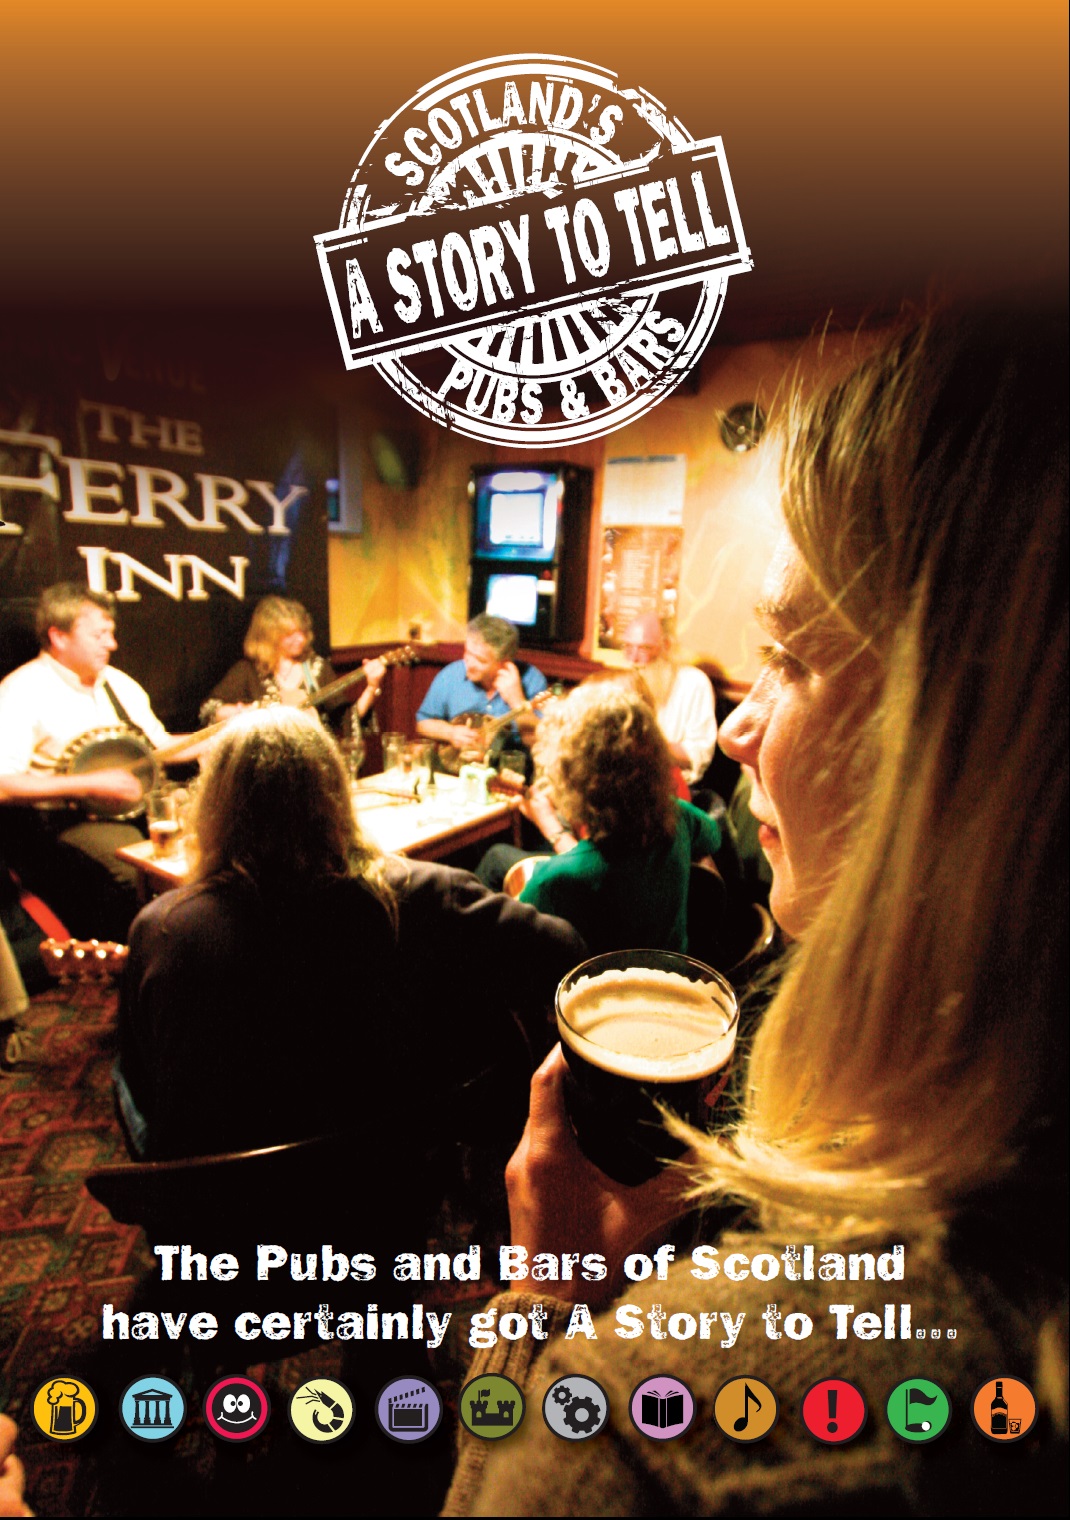 Scotland's Pubs and Bars mailer